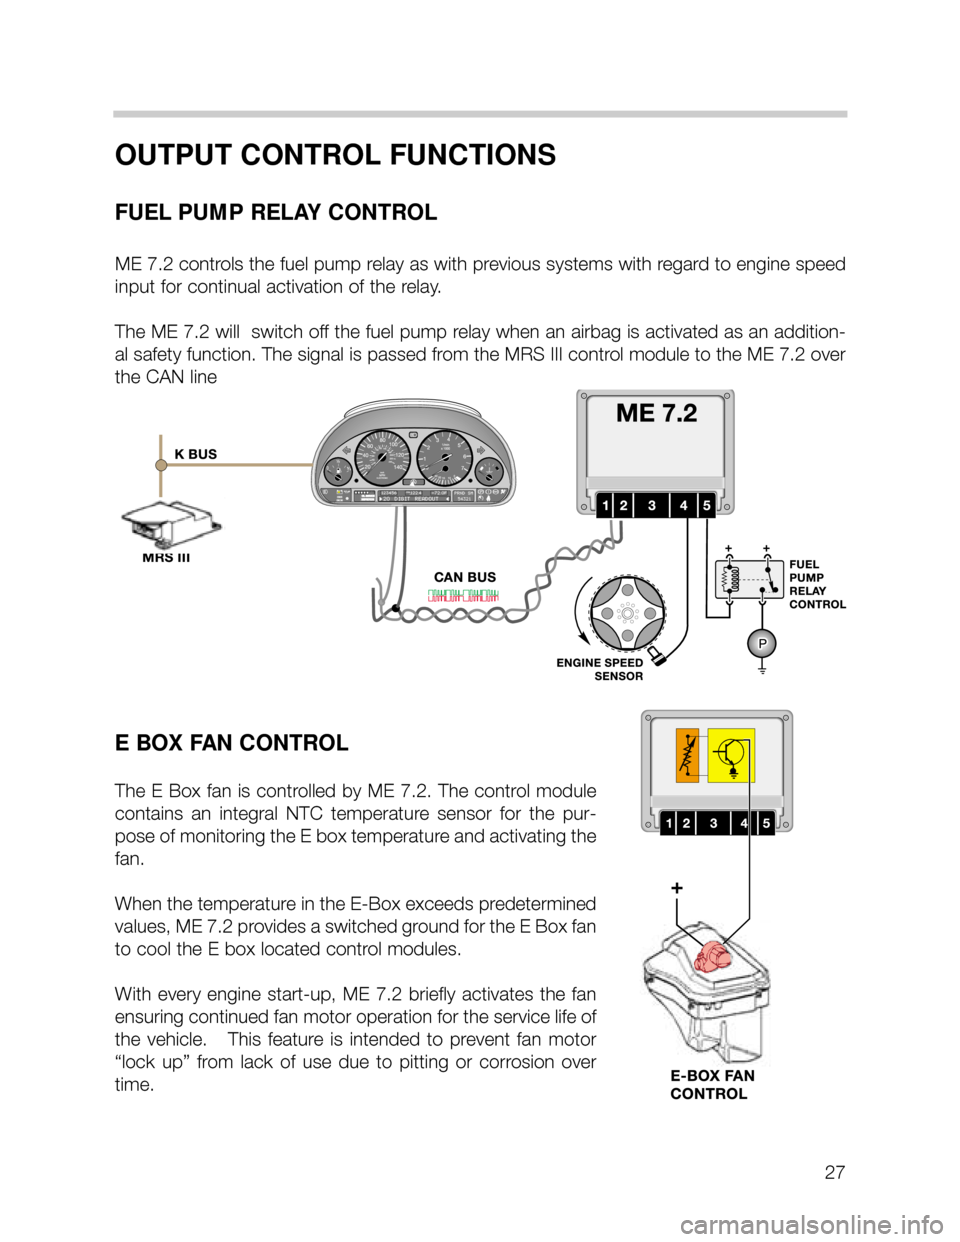 BMW X5 2006 E53 M62TU Engine Workshop Manual 27
OUTPUT CONTROL FUNCTIONS
FUEL PUMP RELAY CONTROL
ME 7.2 controls the fuel pump relay as with previous systems with regard to engine speed
input for continual activation of the relay.  
The ME 7.2 w